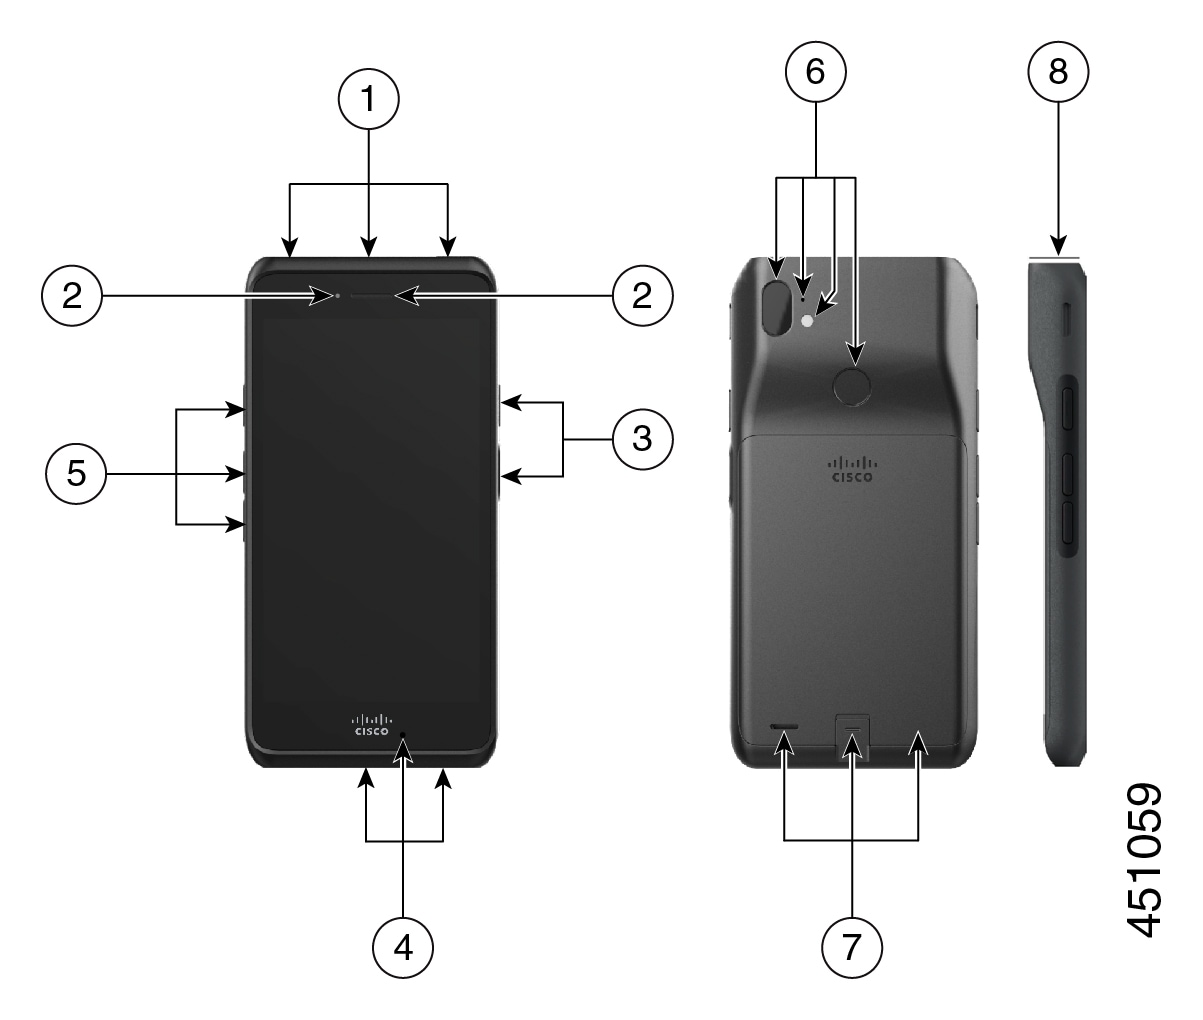 The front, back, and side view of 860S with numbered callouts. On the front view, callouts 1 and 2 are at the top of the phone. Callout 3 is on the right side of the phone. Callout 4 is on the bottom of the phone, and callout 5 is on the left side of the phone. On the back view of the phone, callout 6 is at the top of the phone and callout 7 is at the bottom. On the side view of the phone, callout 8 is at the top of the phone.